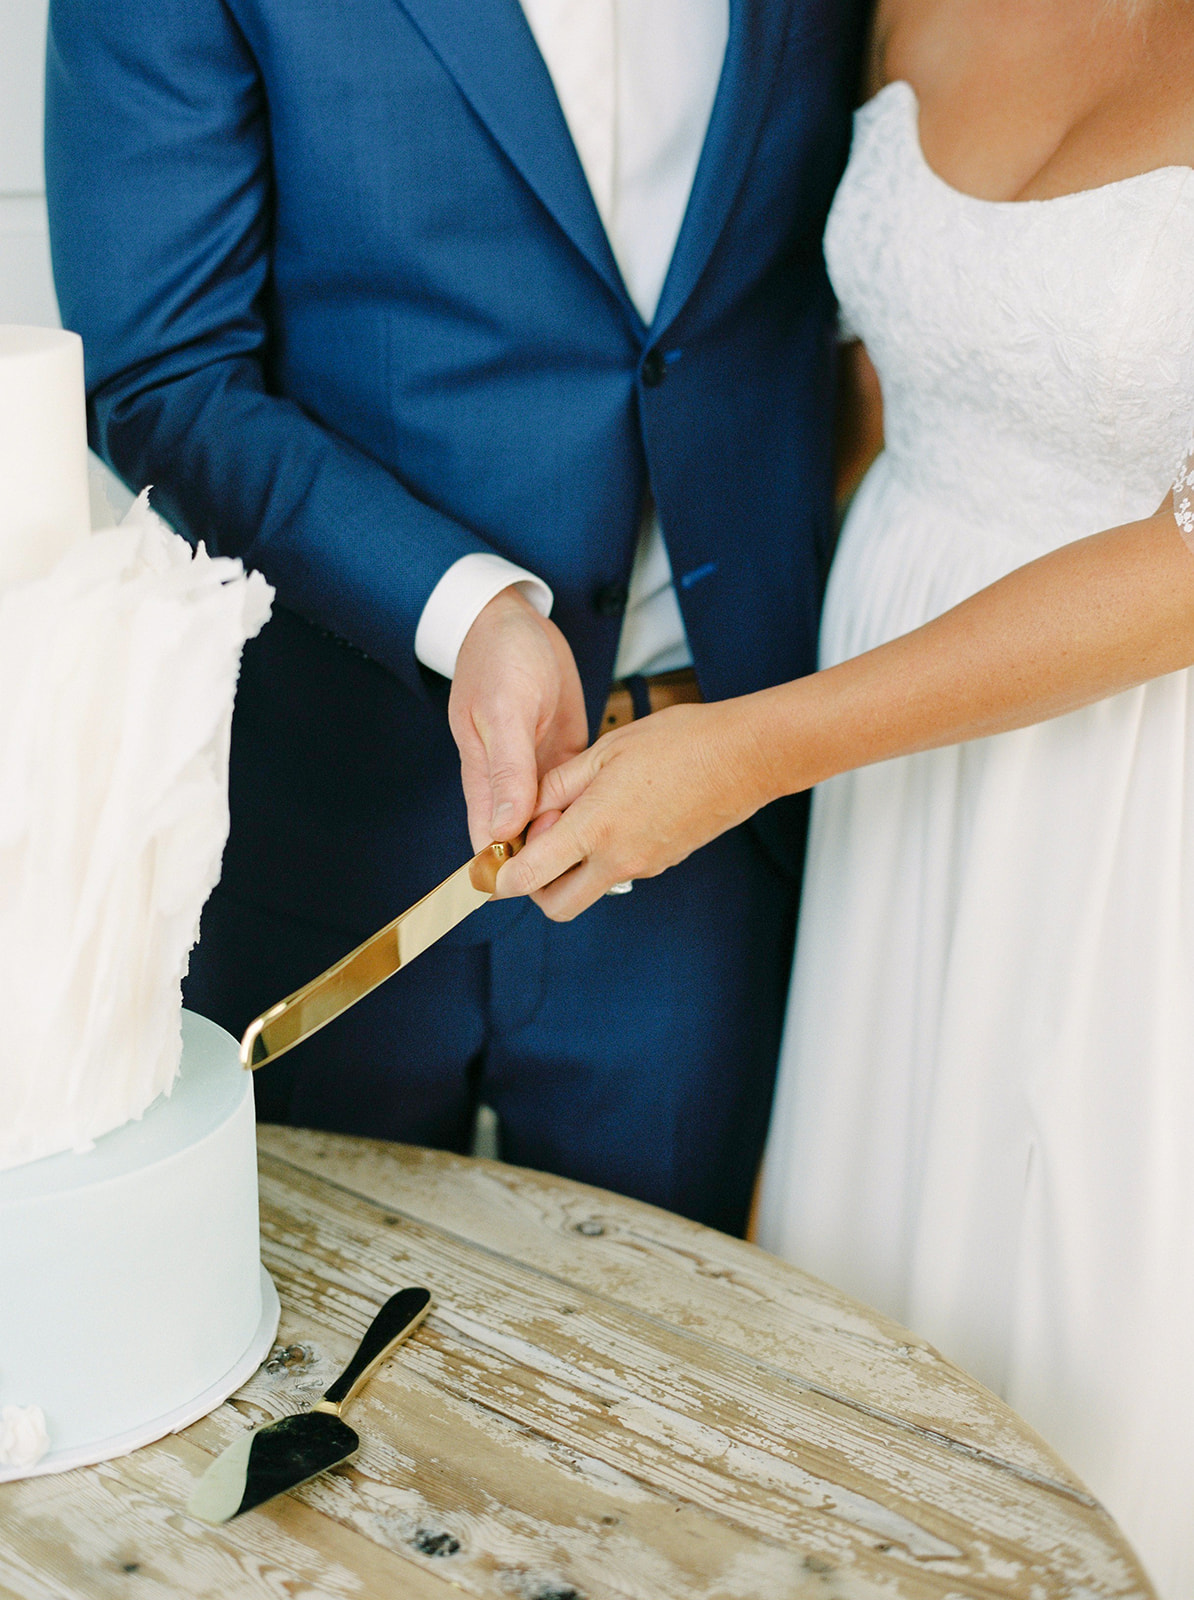 Bride and groom cake cutting, white and blue cake